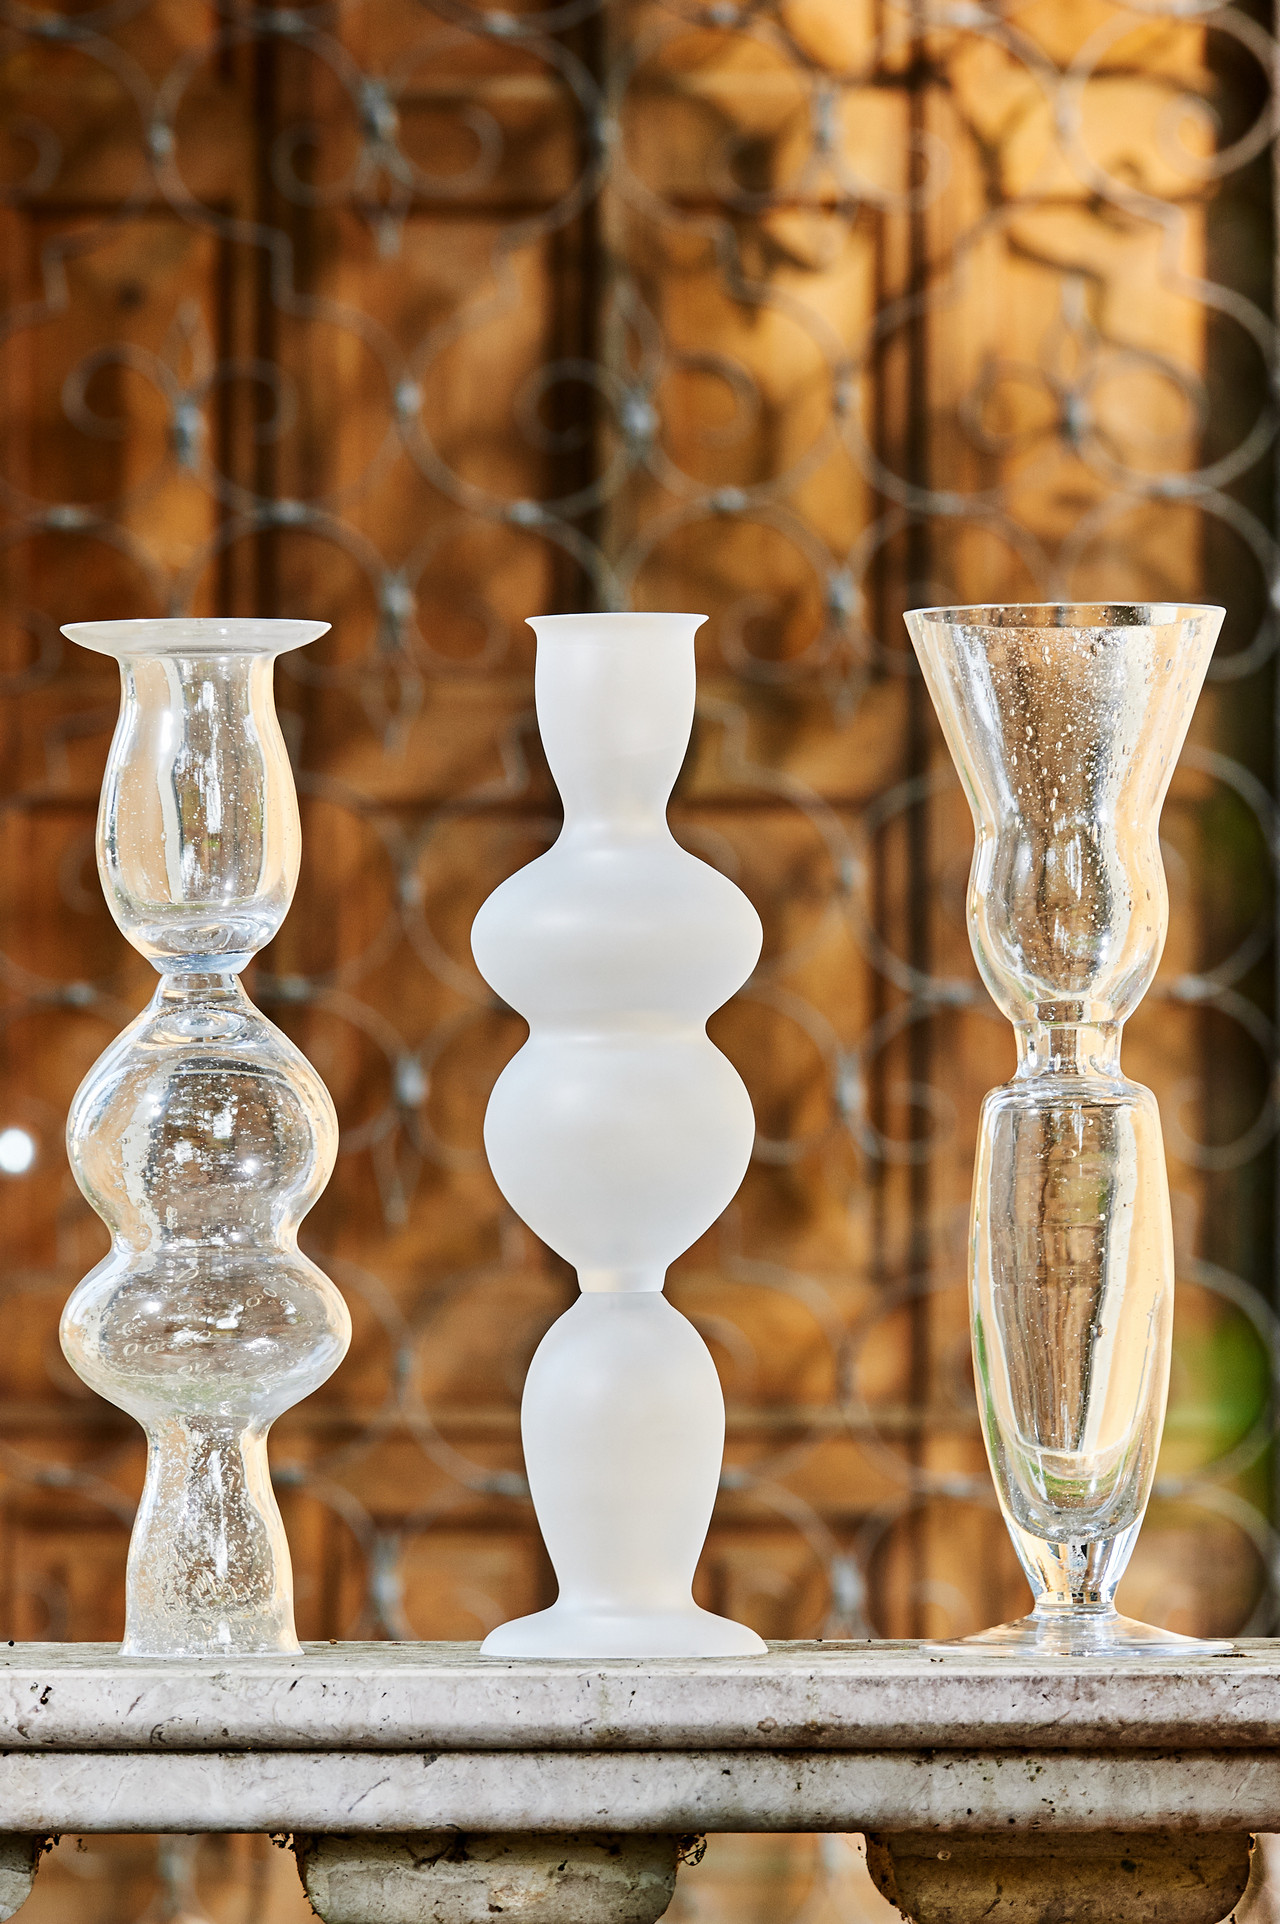 19 attractive Large Glass Vase Candle Holders 2022 free download large glass vase candle holders of oskar kogoj nature design glass intended for caffe florian collection of vases